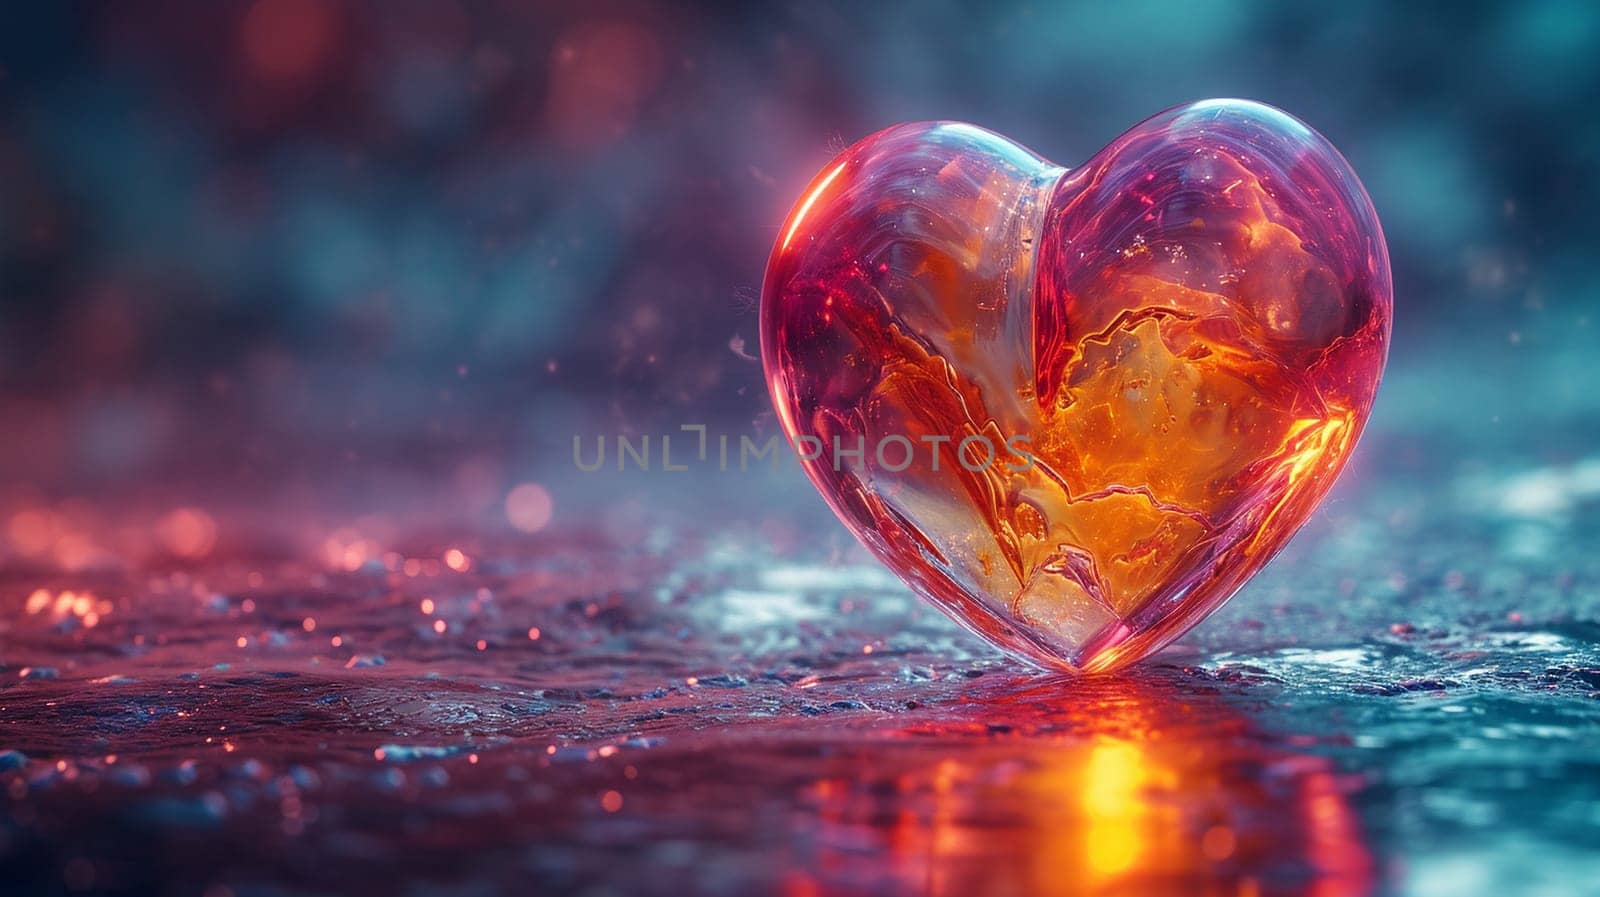 A beautiful image of a heart on a colorful background. High quality illustration